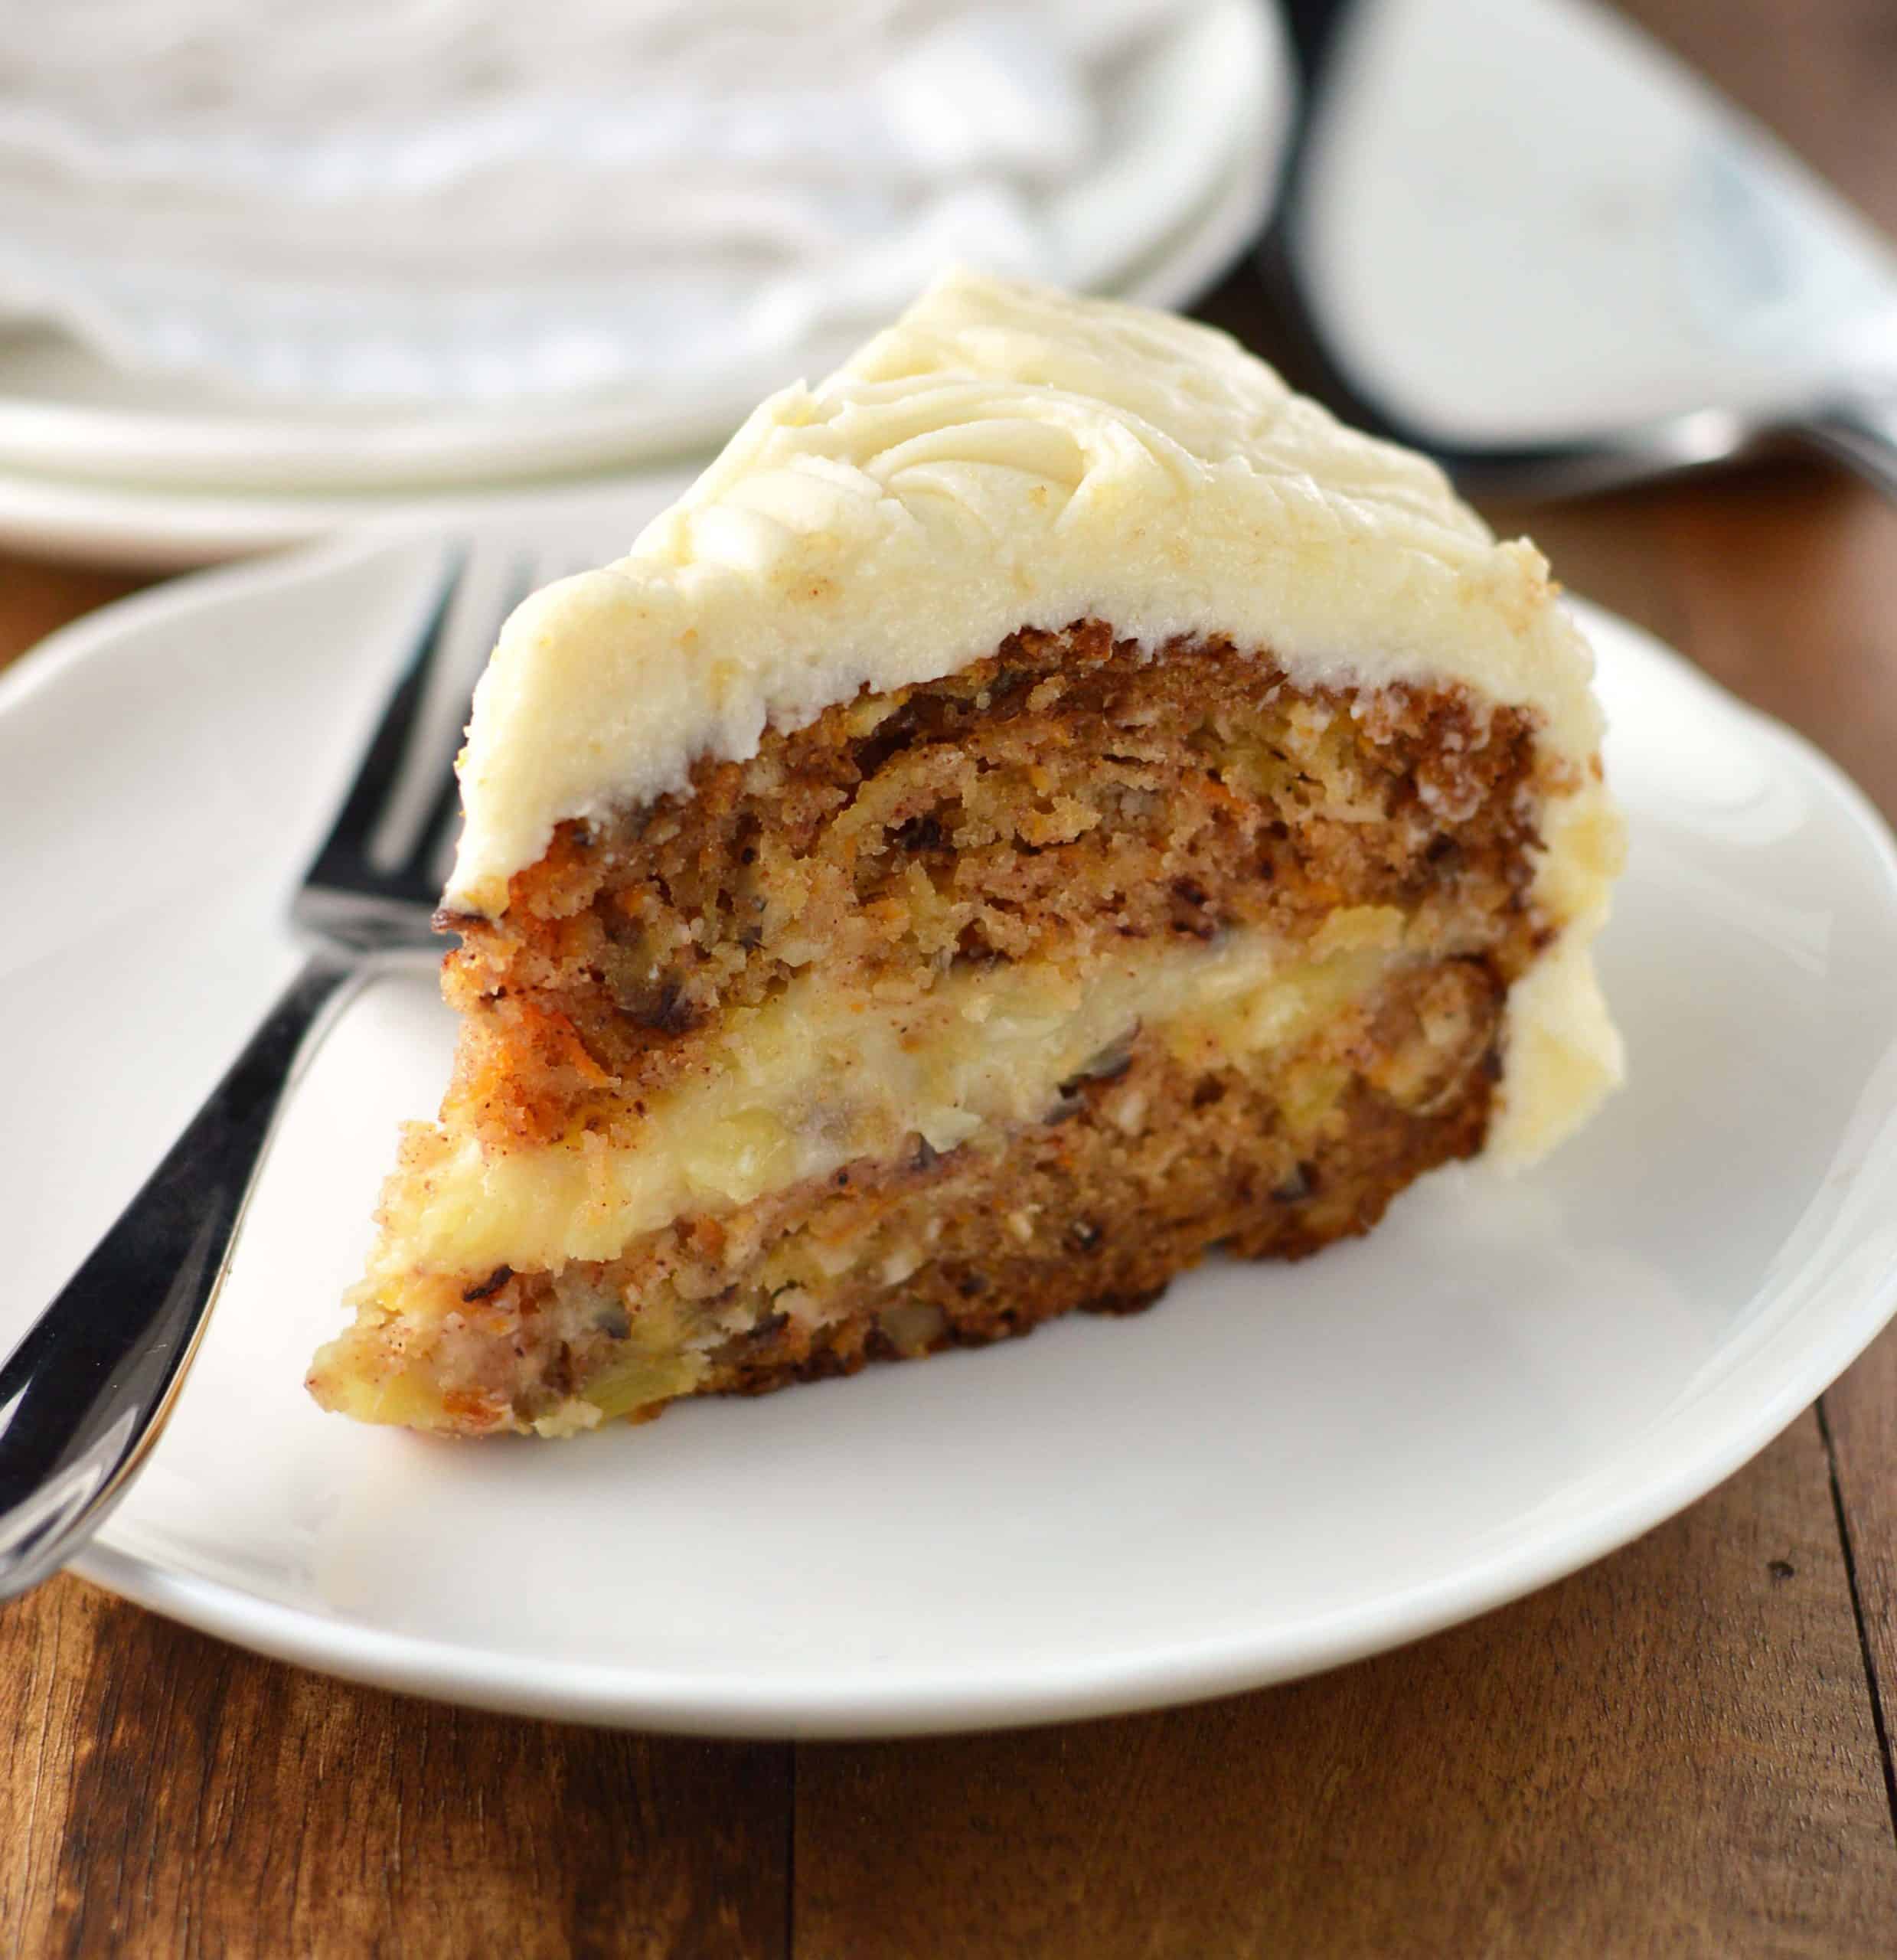 Carrot Cake with creamy pineapple filling